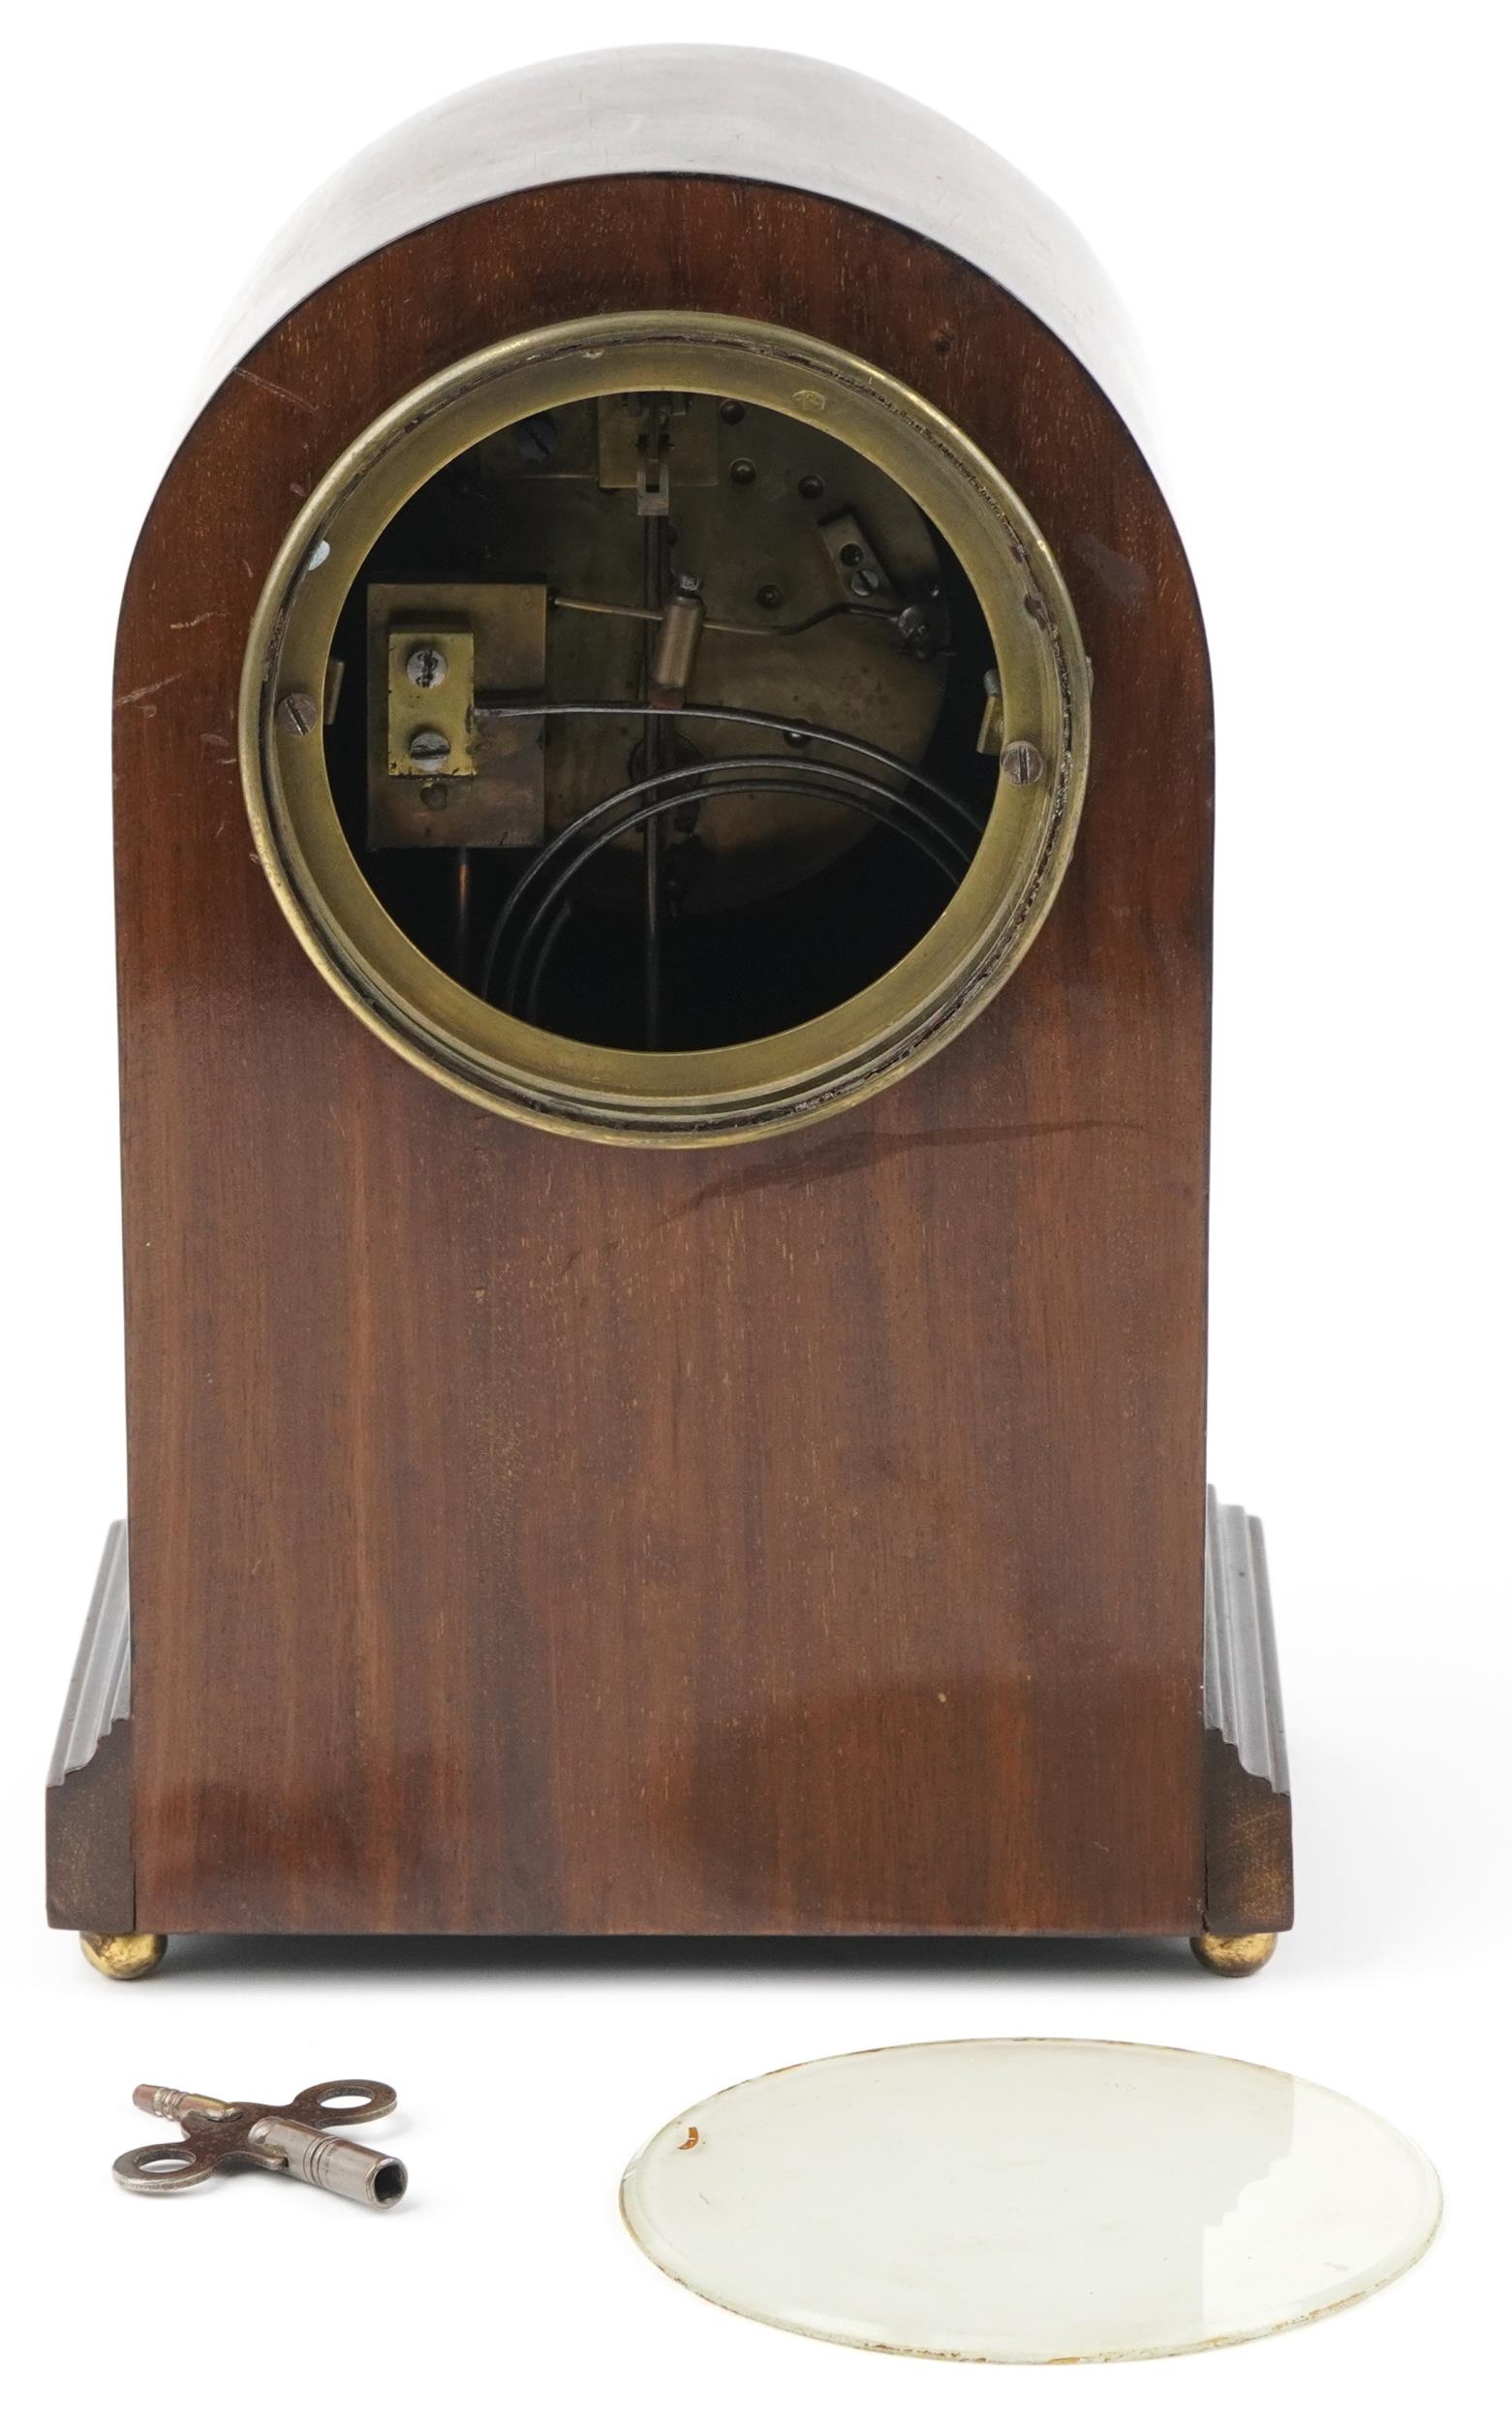 Edwardian inlaid mahogany dome top mantle clock with painted chapter ring having Roman numerals, - Image 4 of 6